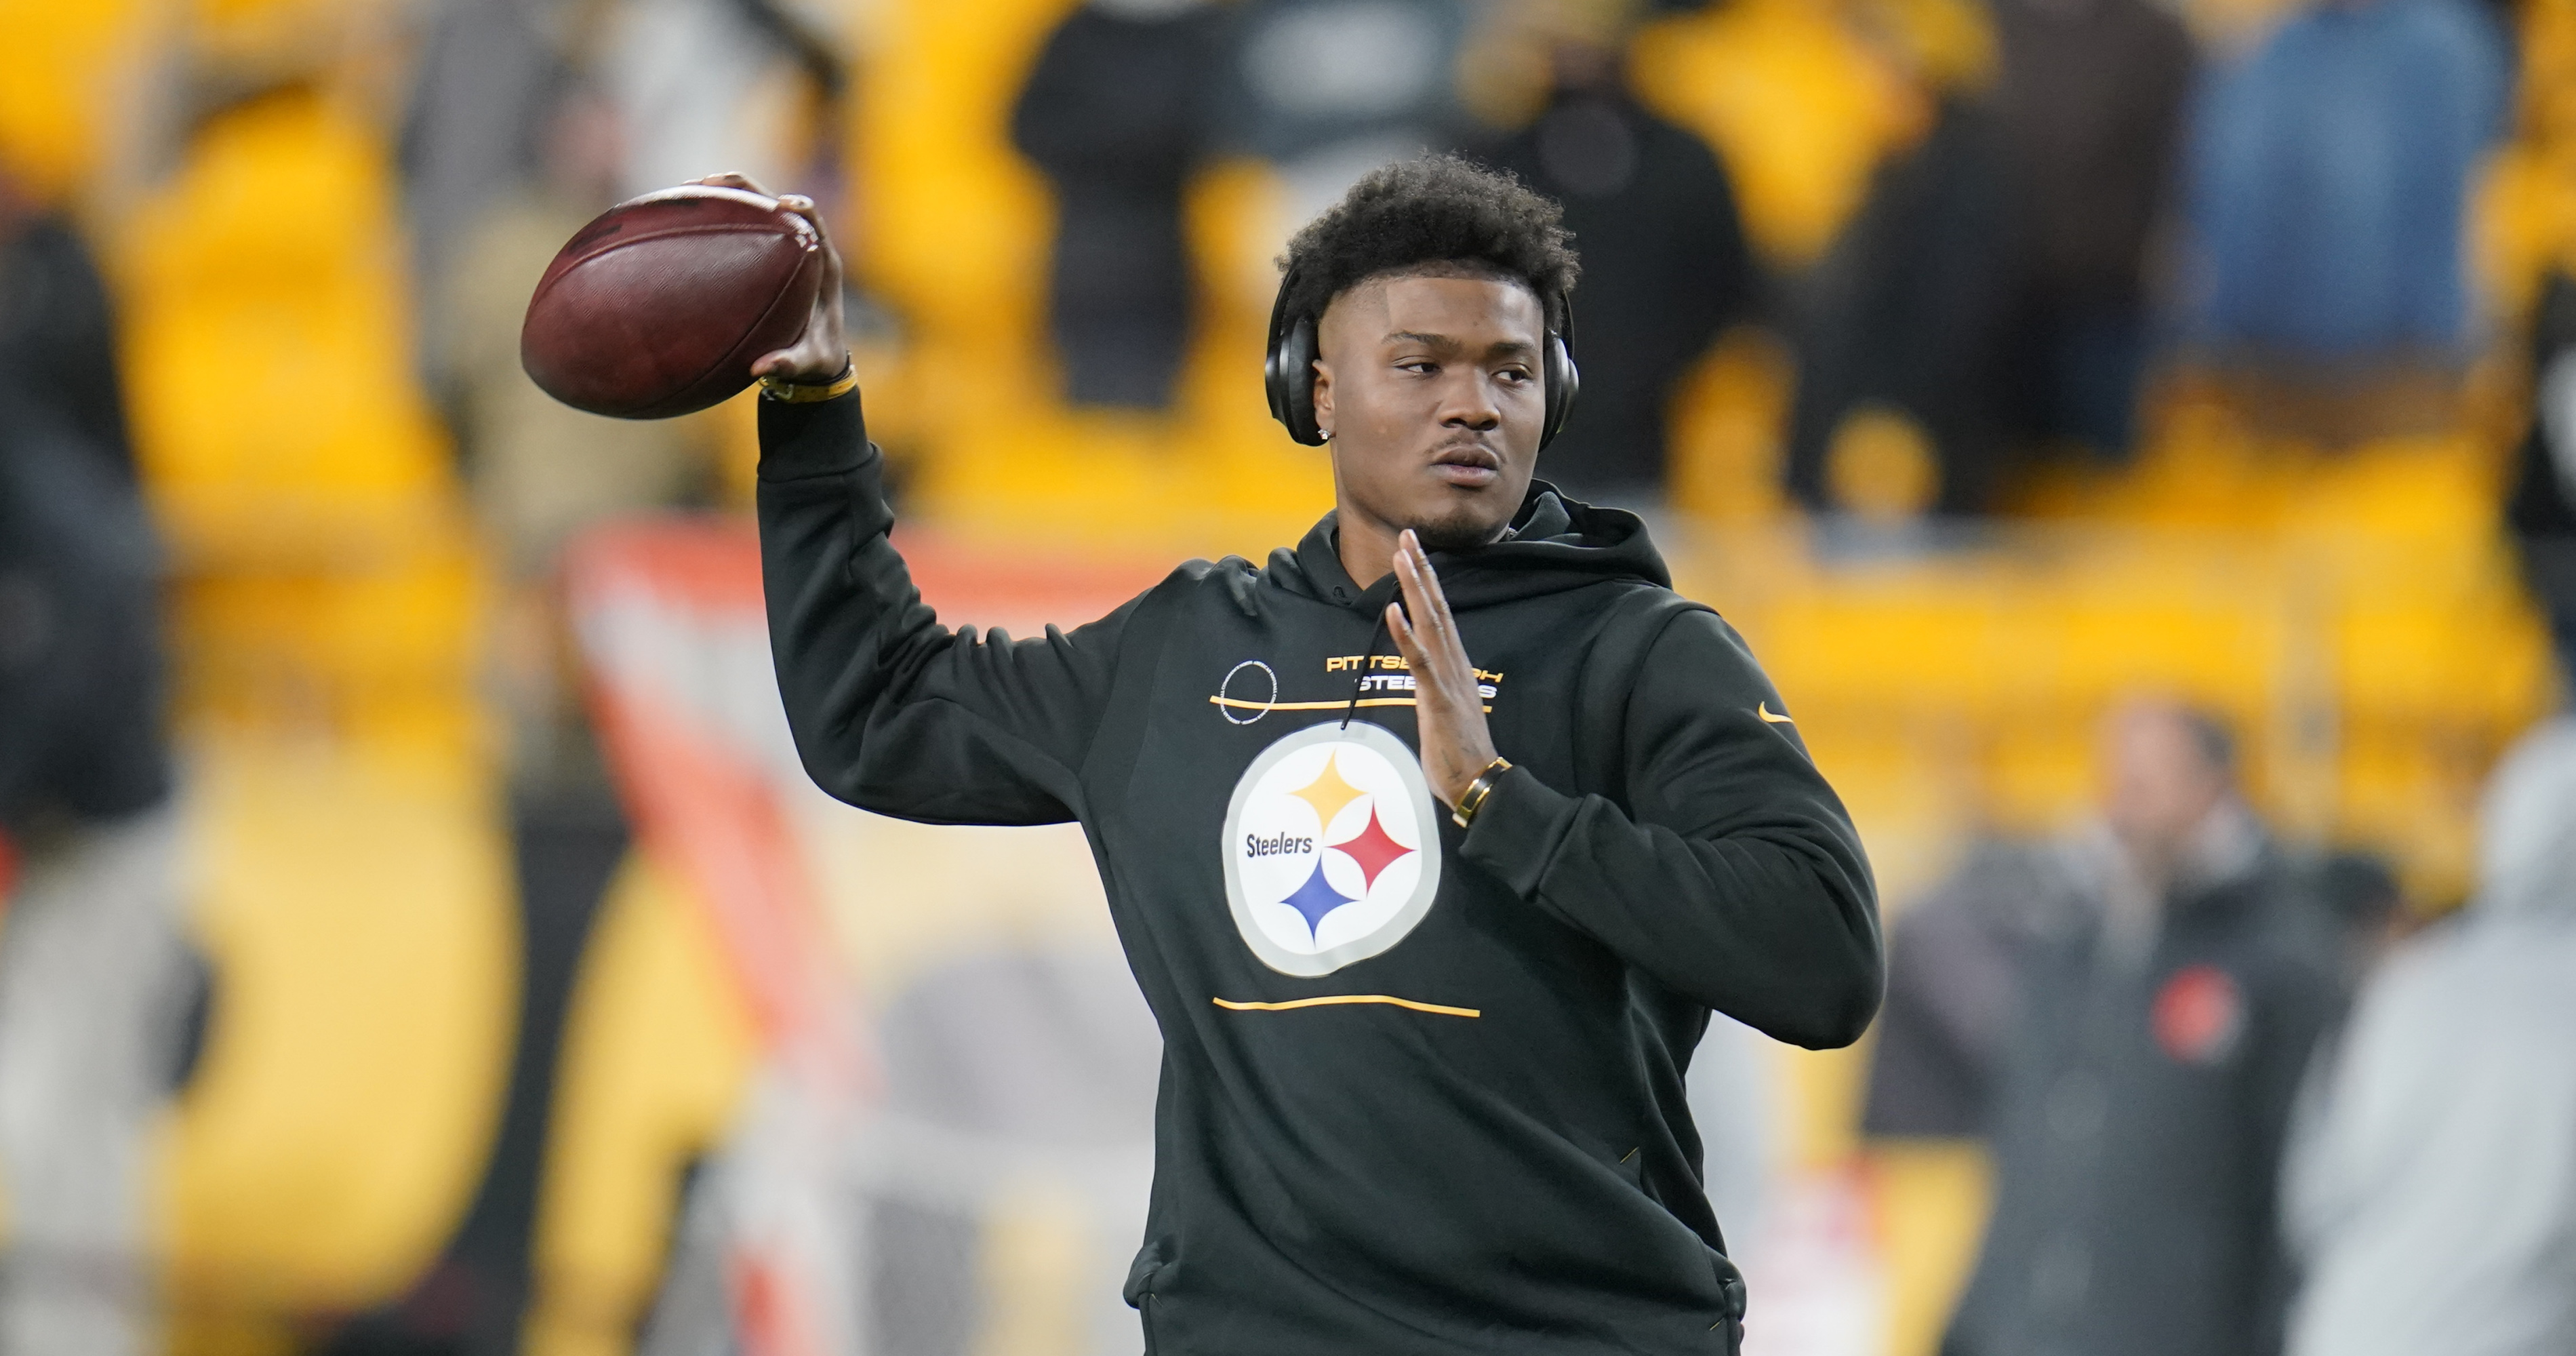 Steelers Rumors Dwayne Haskins to Be Given RFA Tender Contract Worth